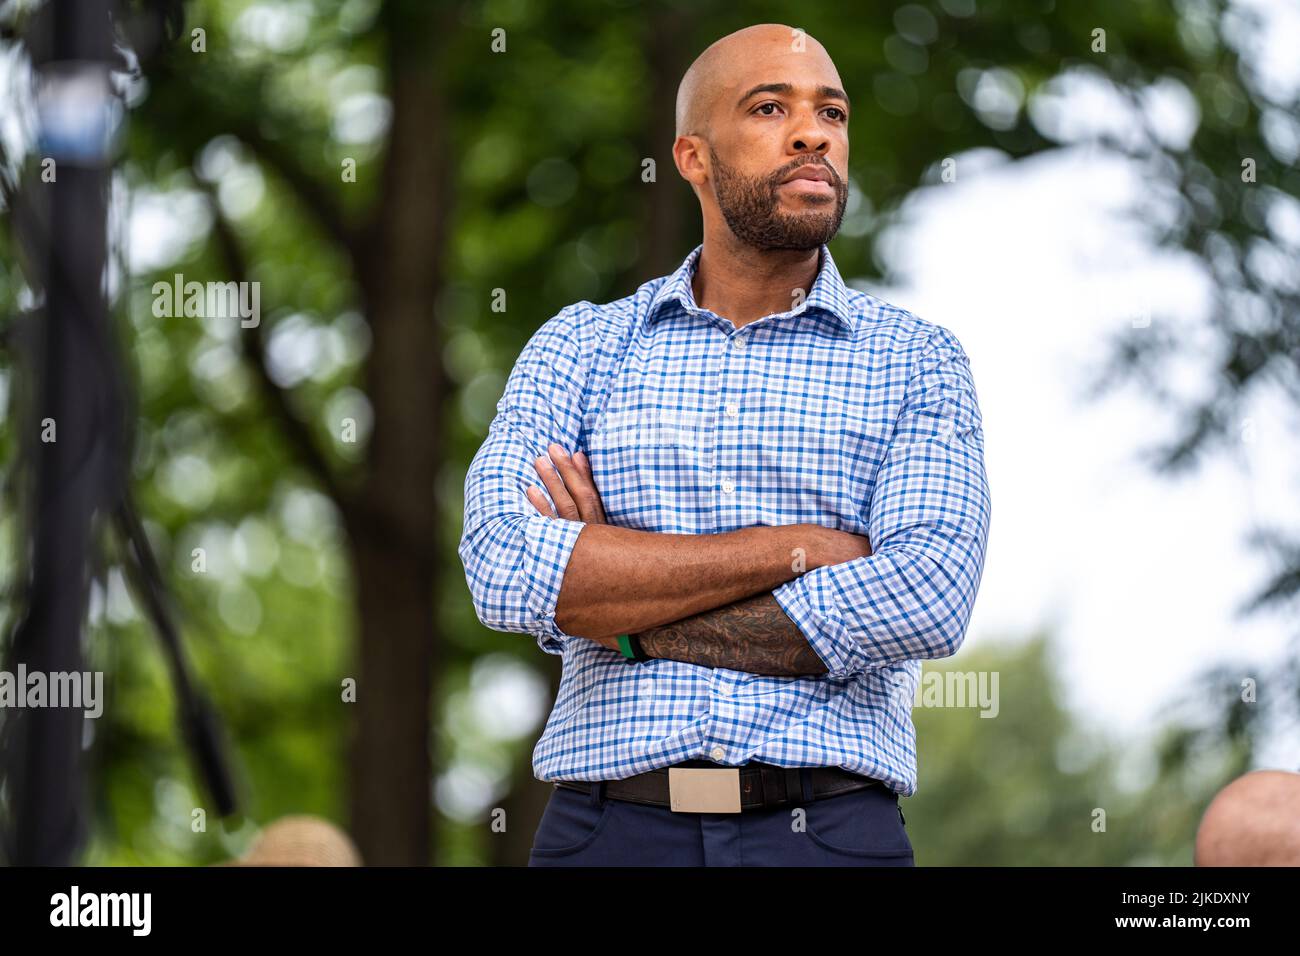 Mandela Barnes, a Democratic candidate for US Senator in Wisconsin, speaks to a crowd during an outdoor campaign event in the summer of 2022. Stock Photo